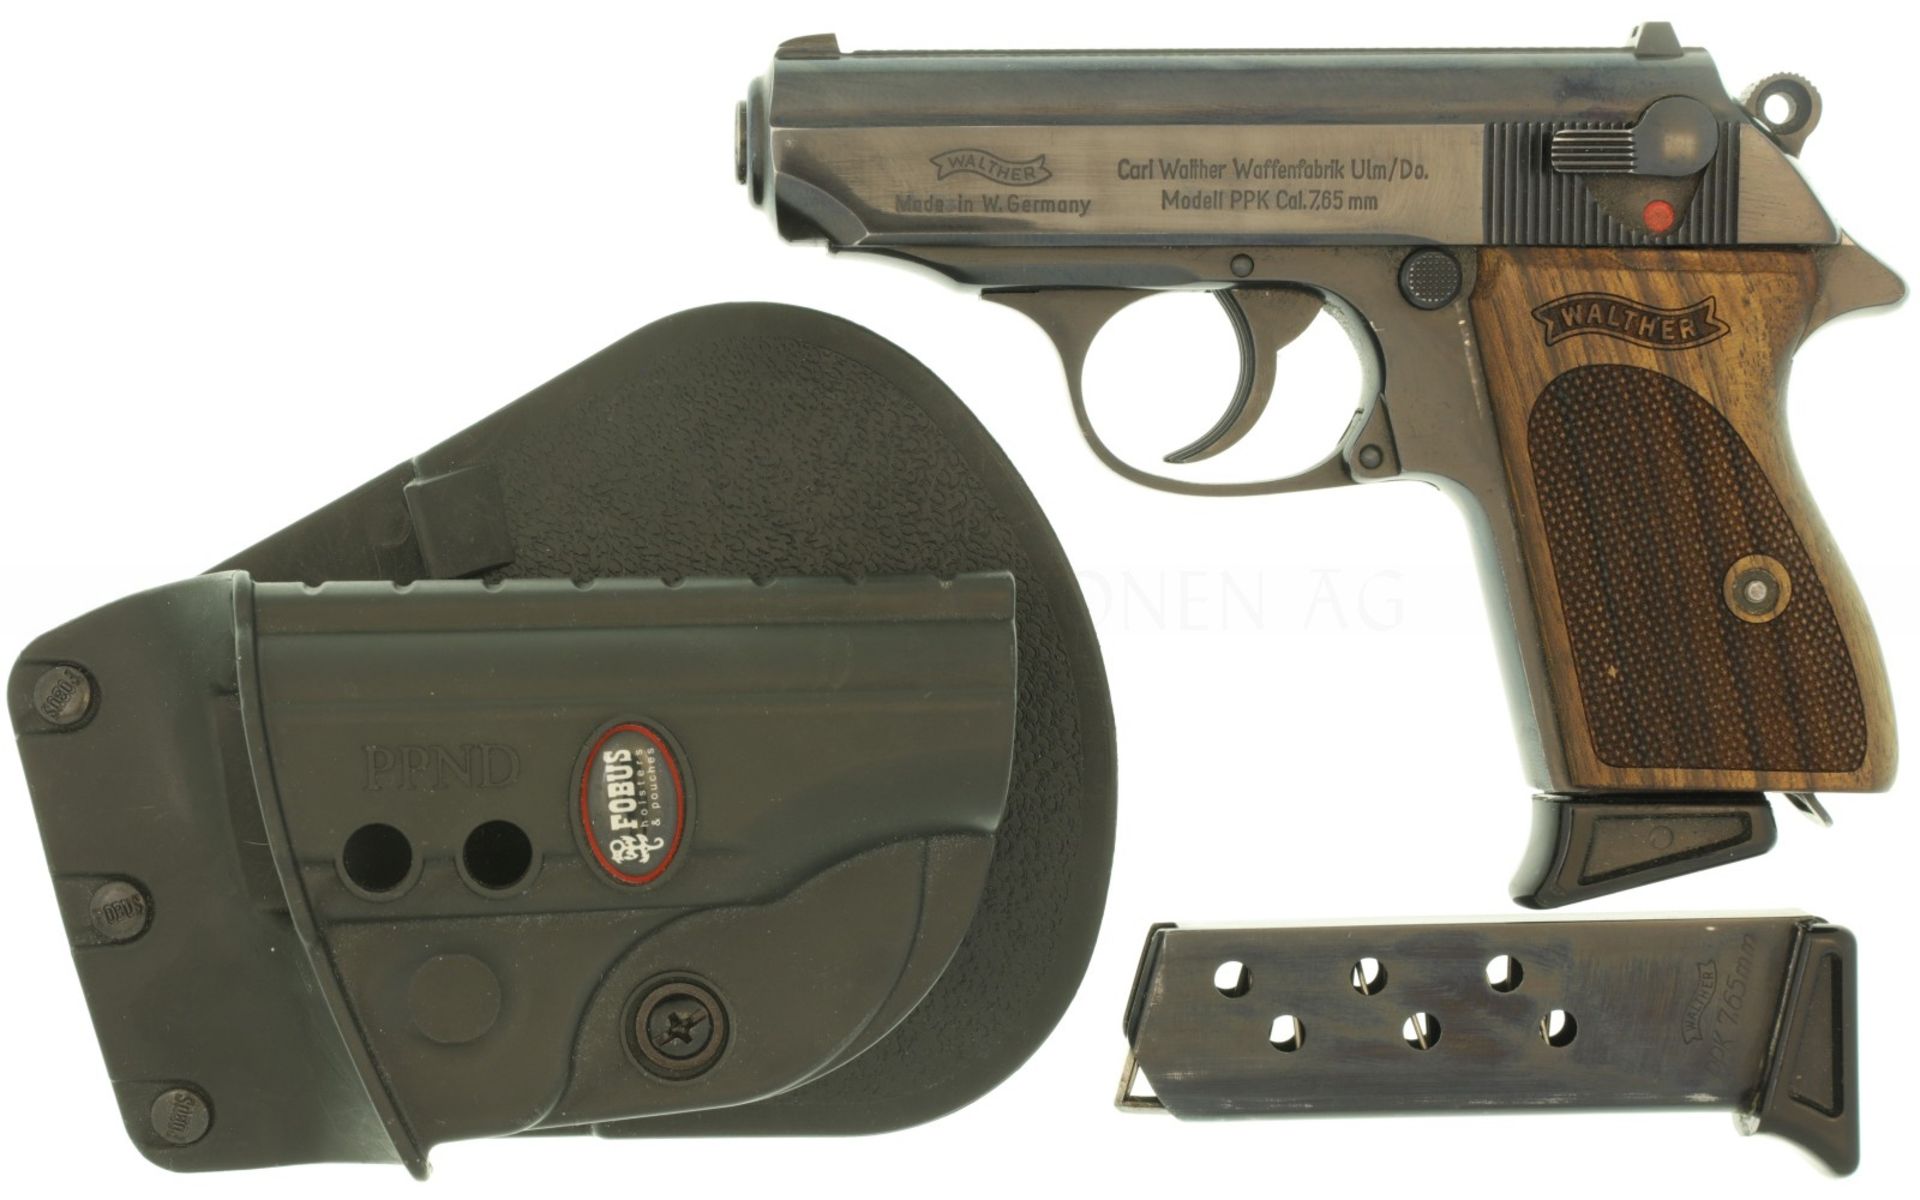 Pistole, Walther PPK, Ulm, Kal. 7.65mm - Image 2 of 2